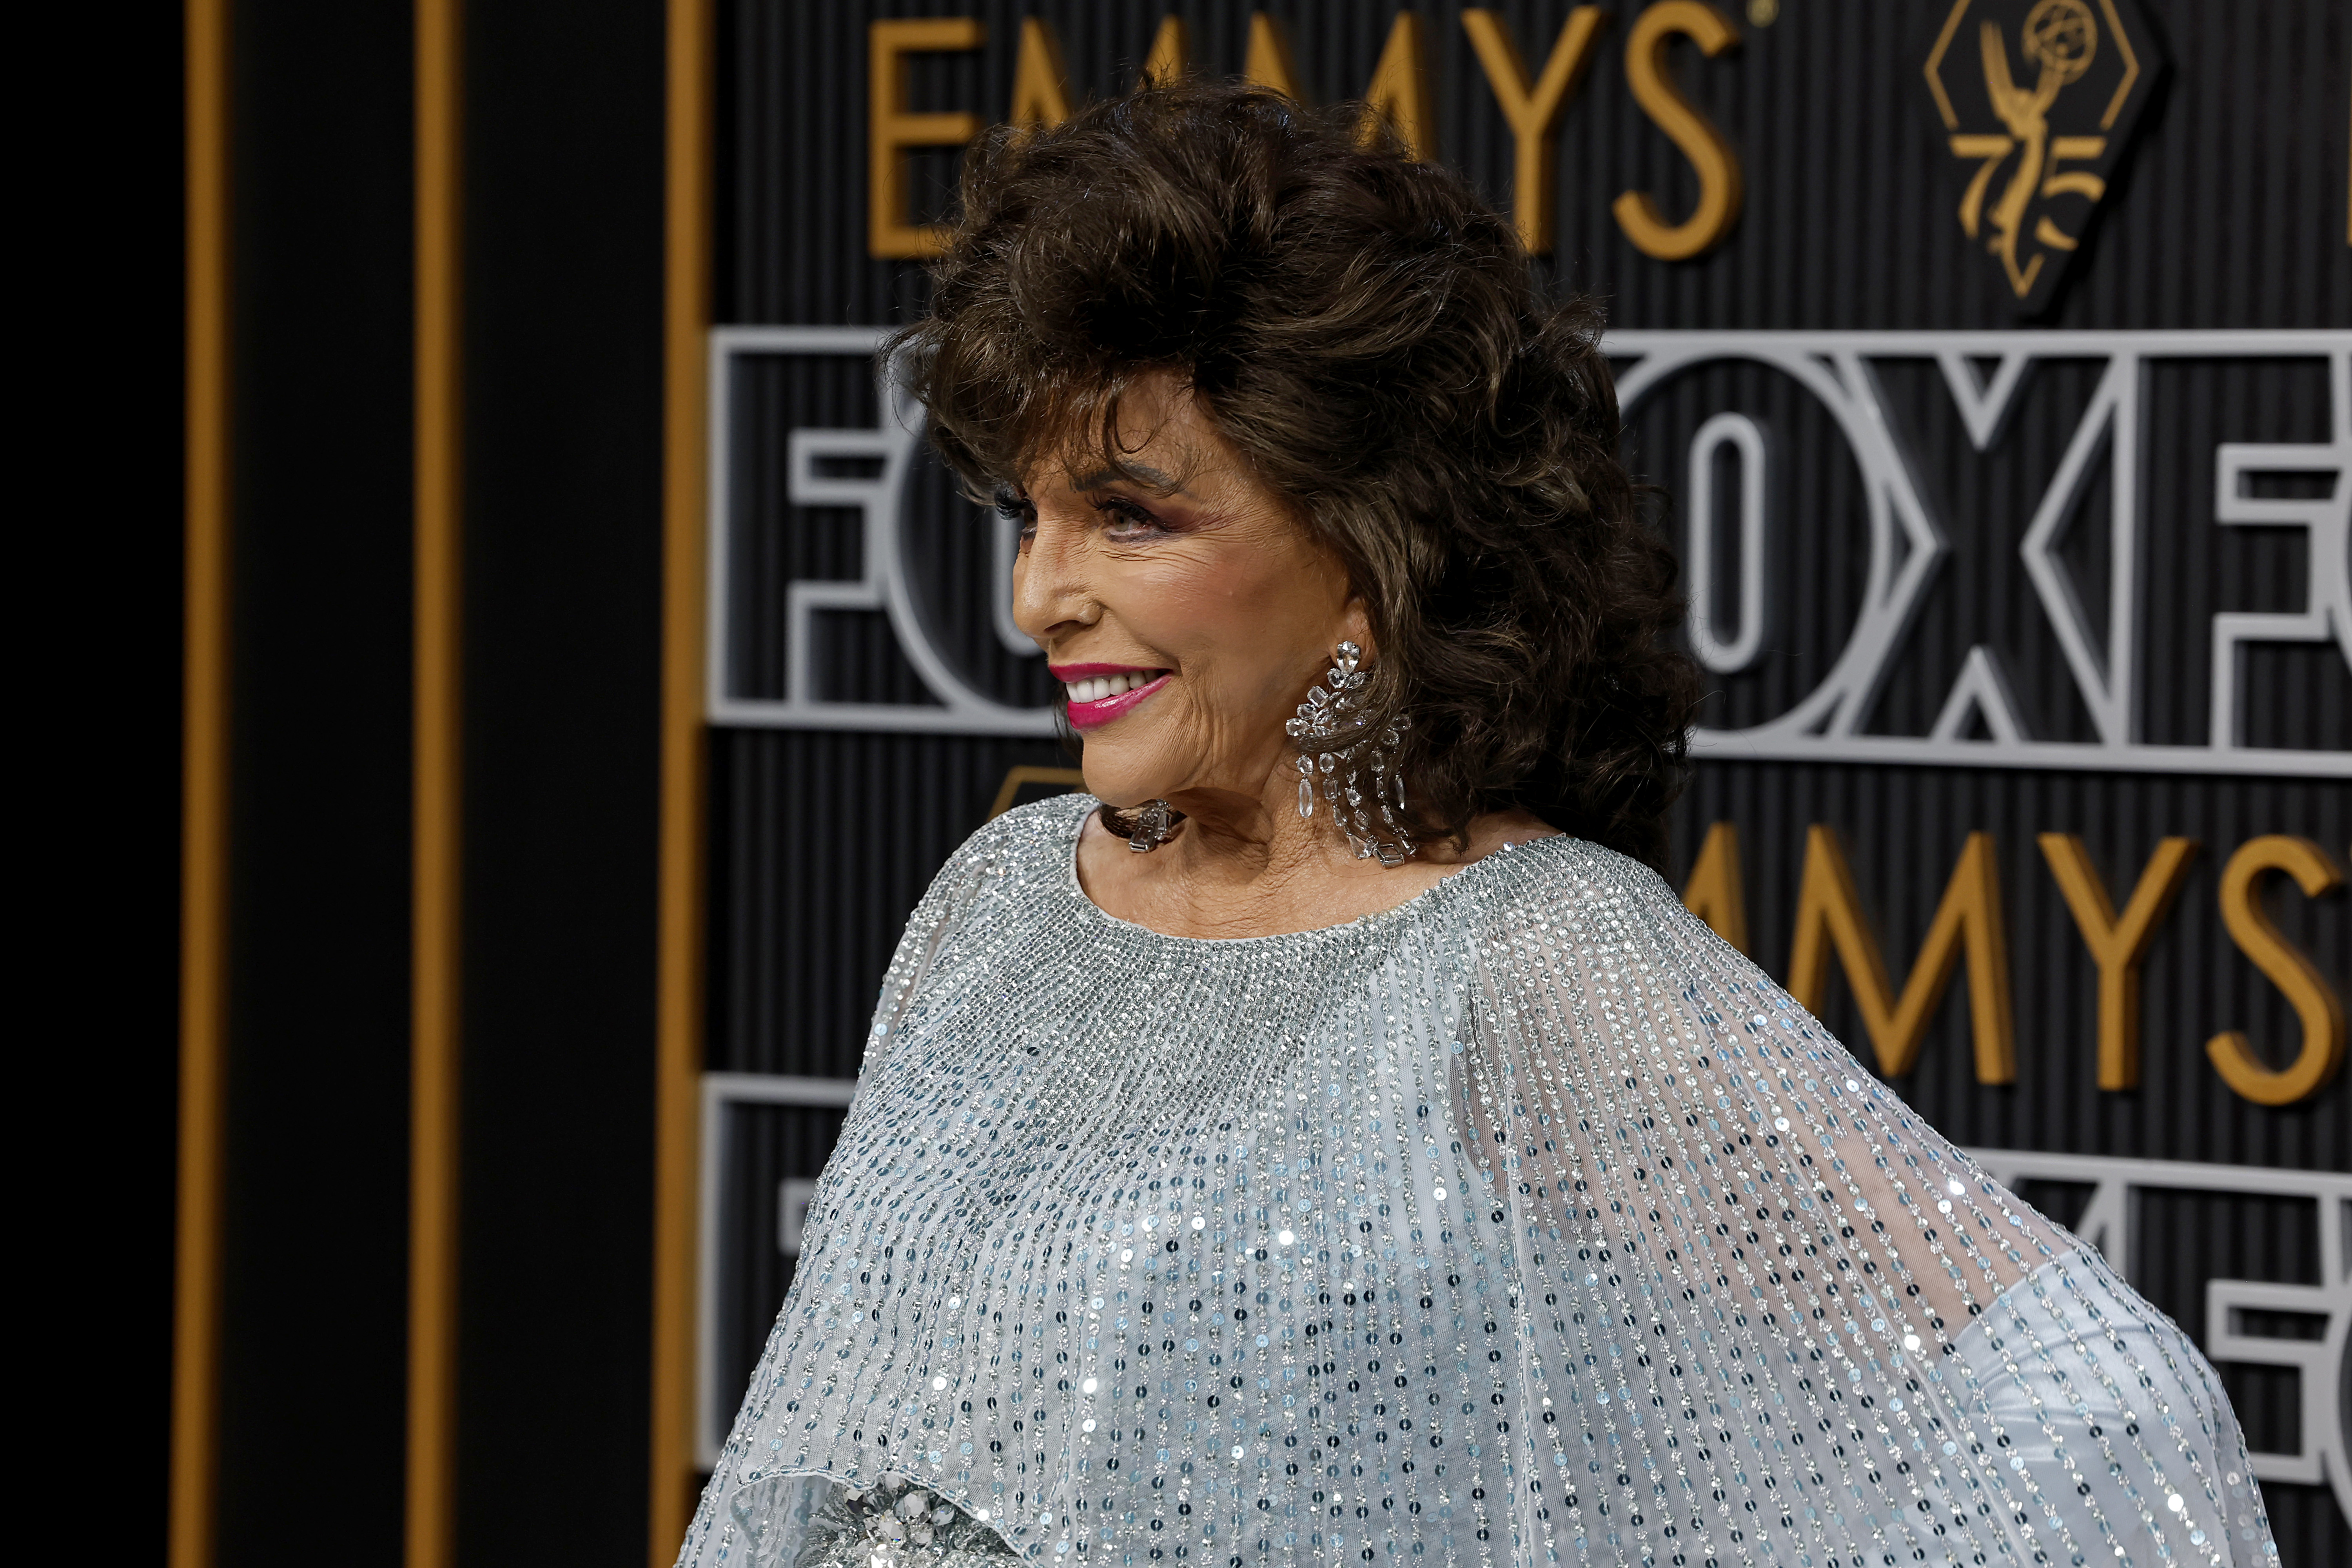 Joan has been working in Hollywood for decades and has amassed an impressive net worth